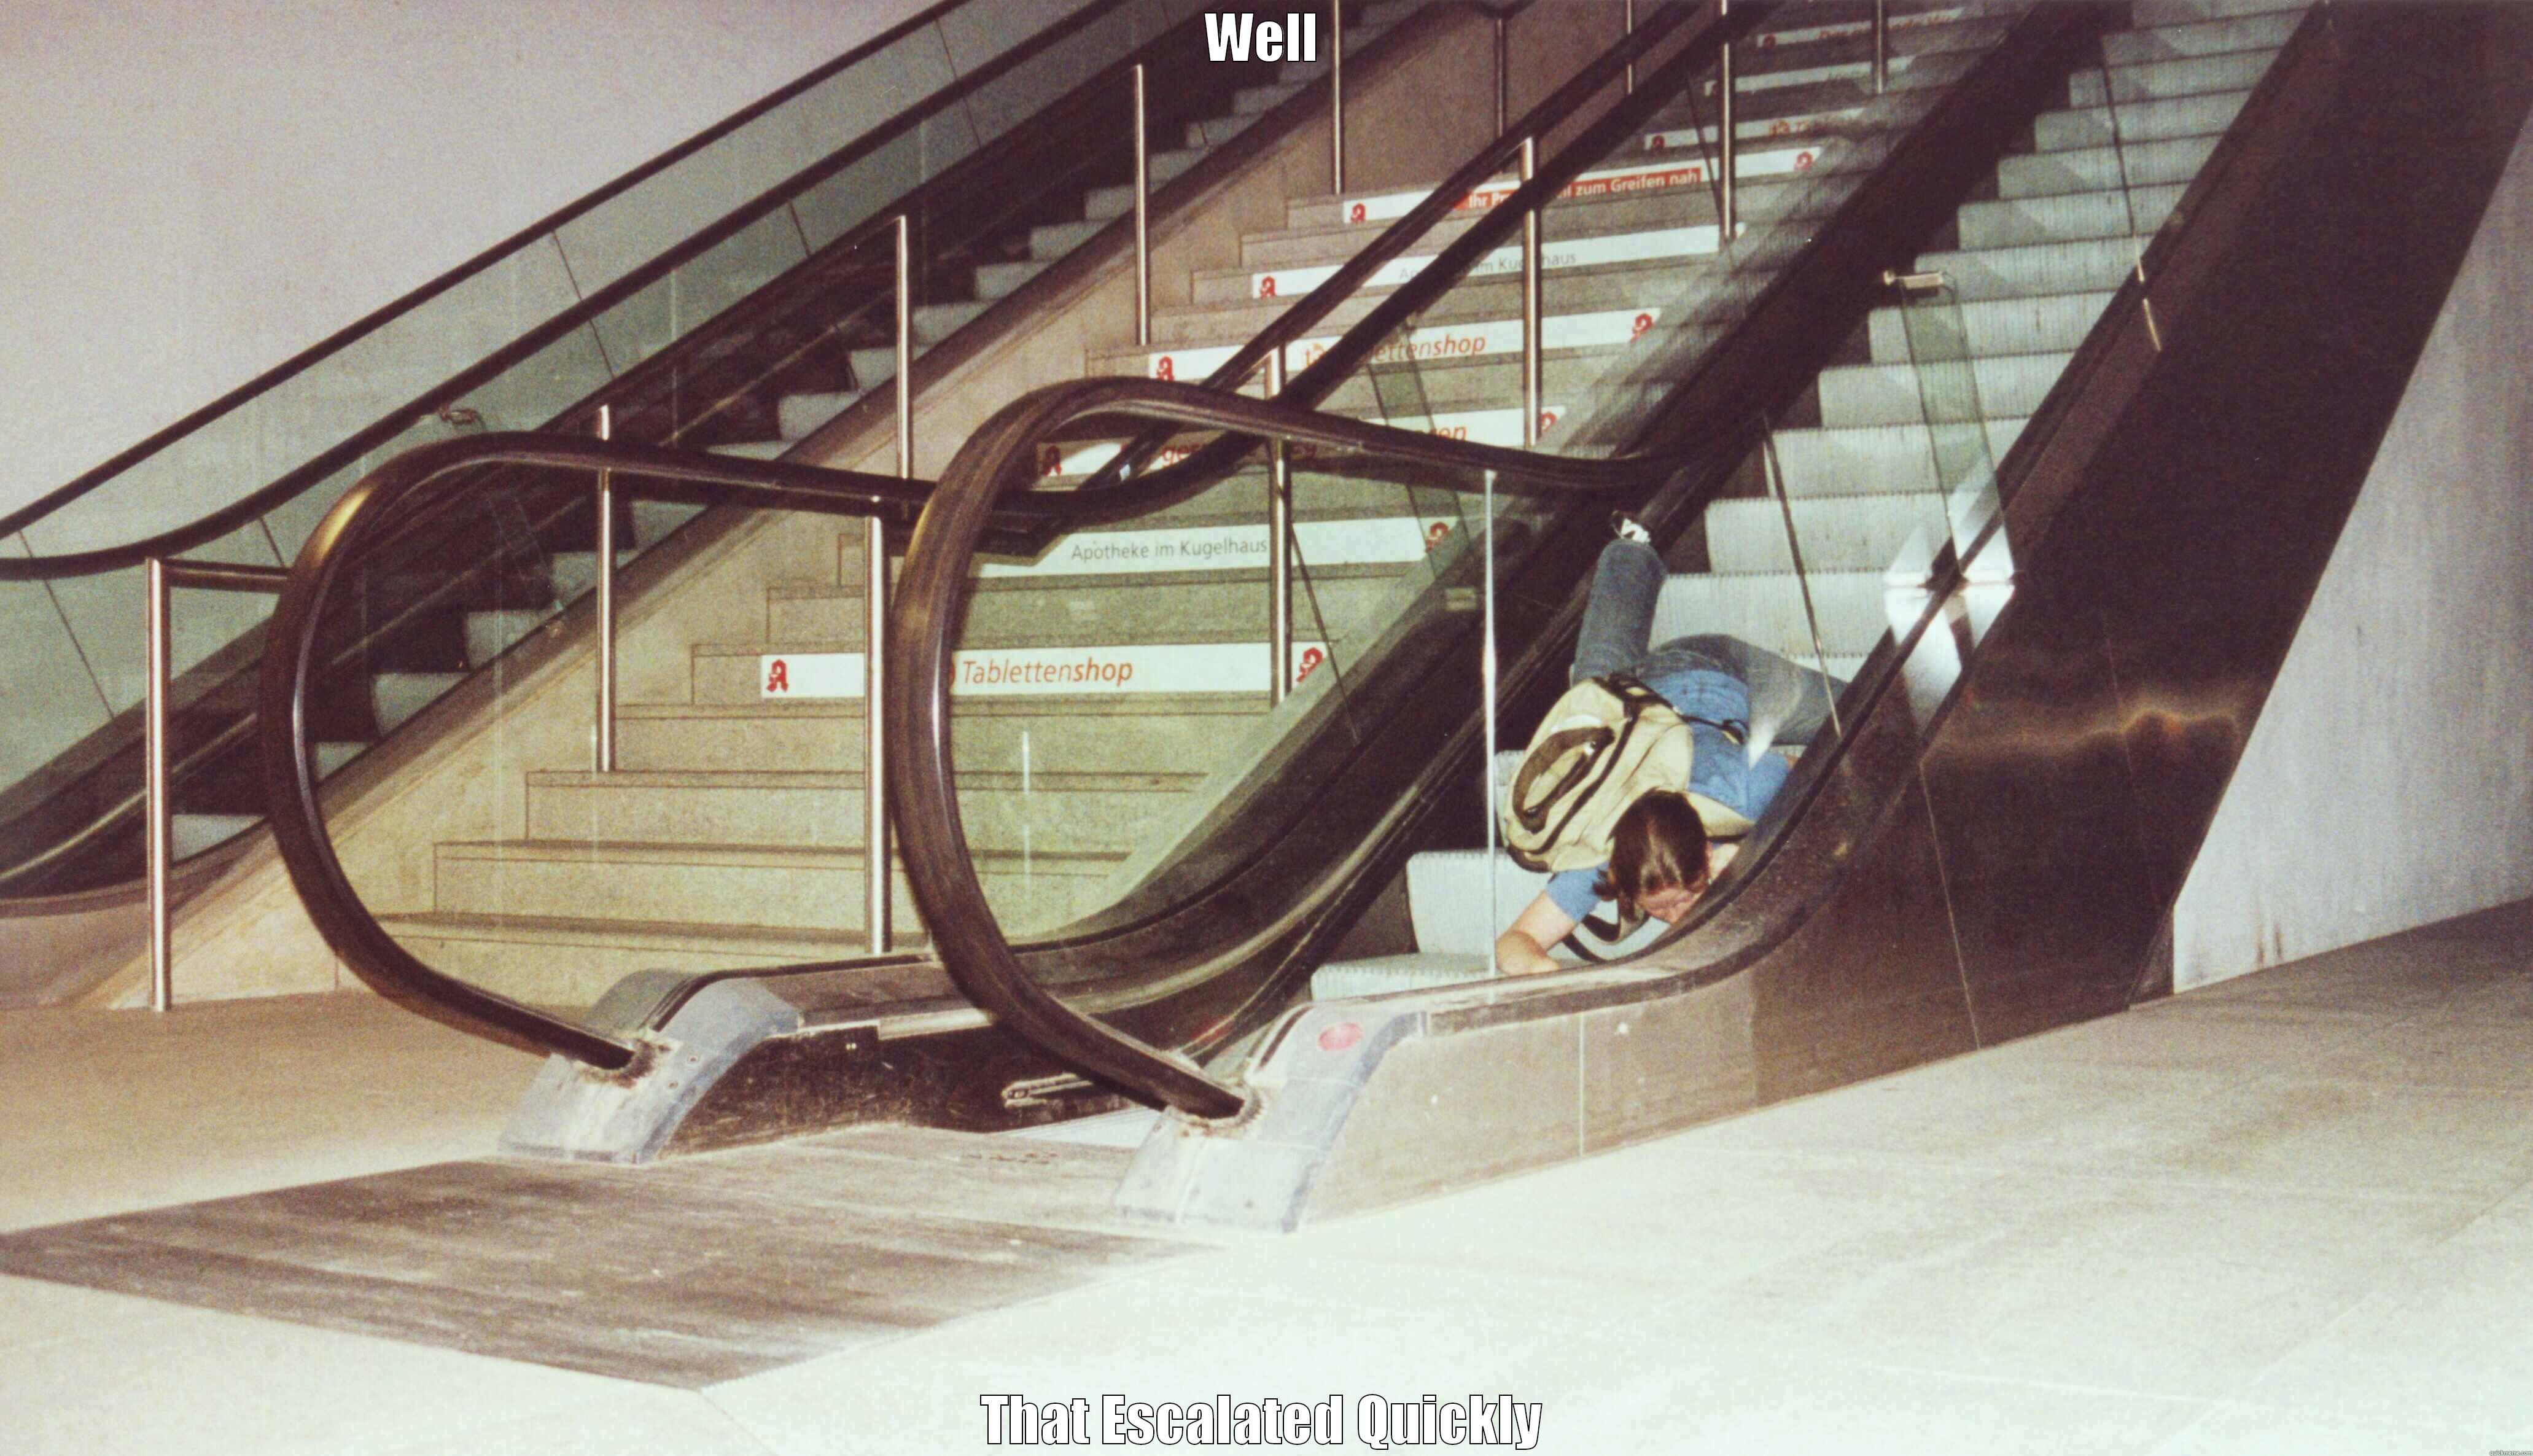 Fell Down Escalator - WELL THAT ESCALATED QUICKLY Misc